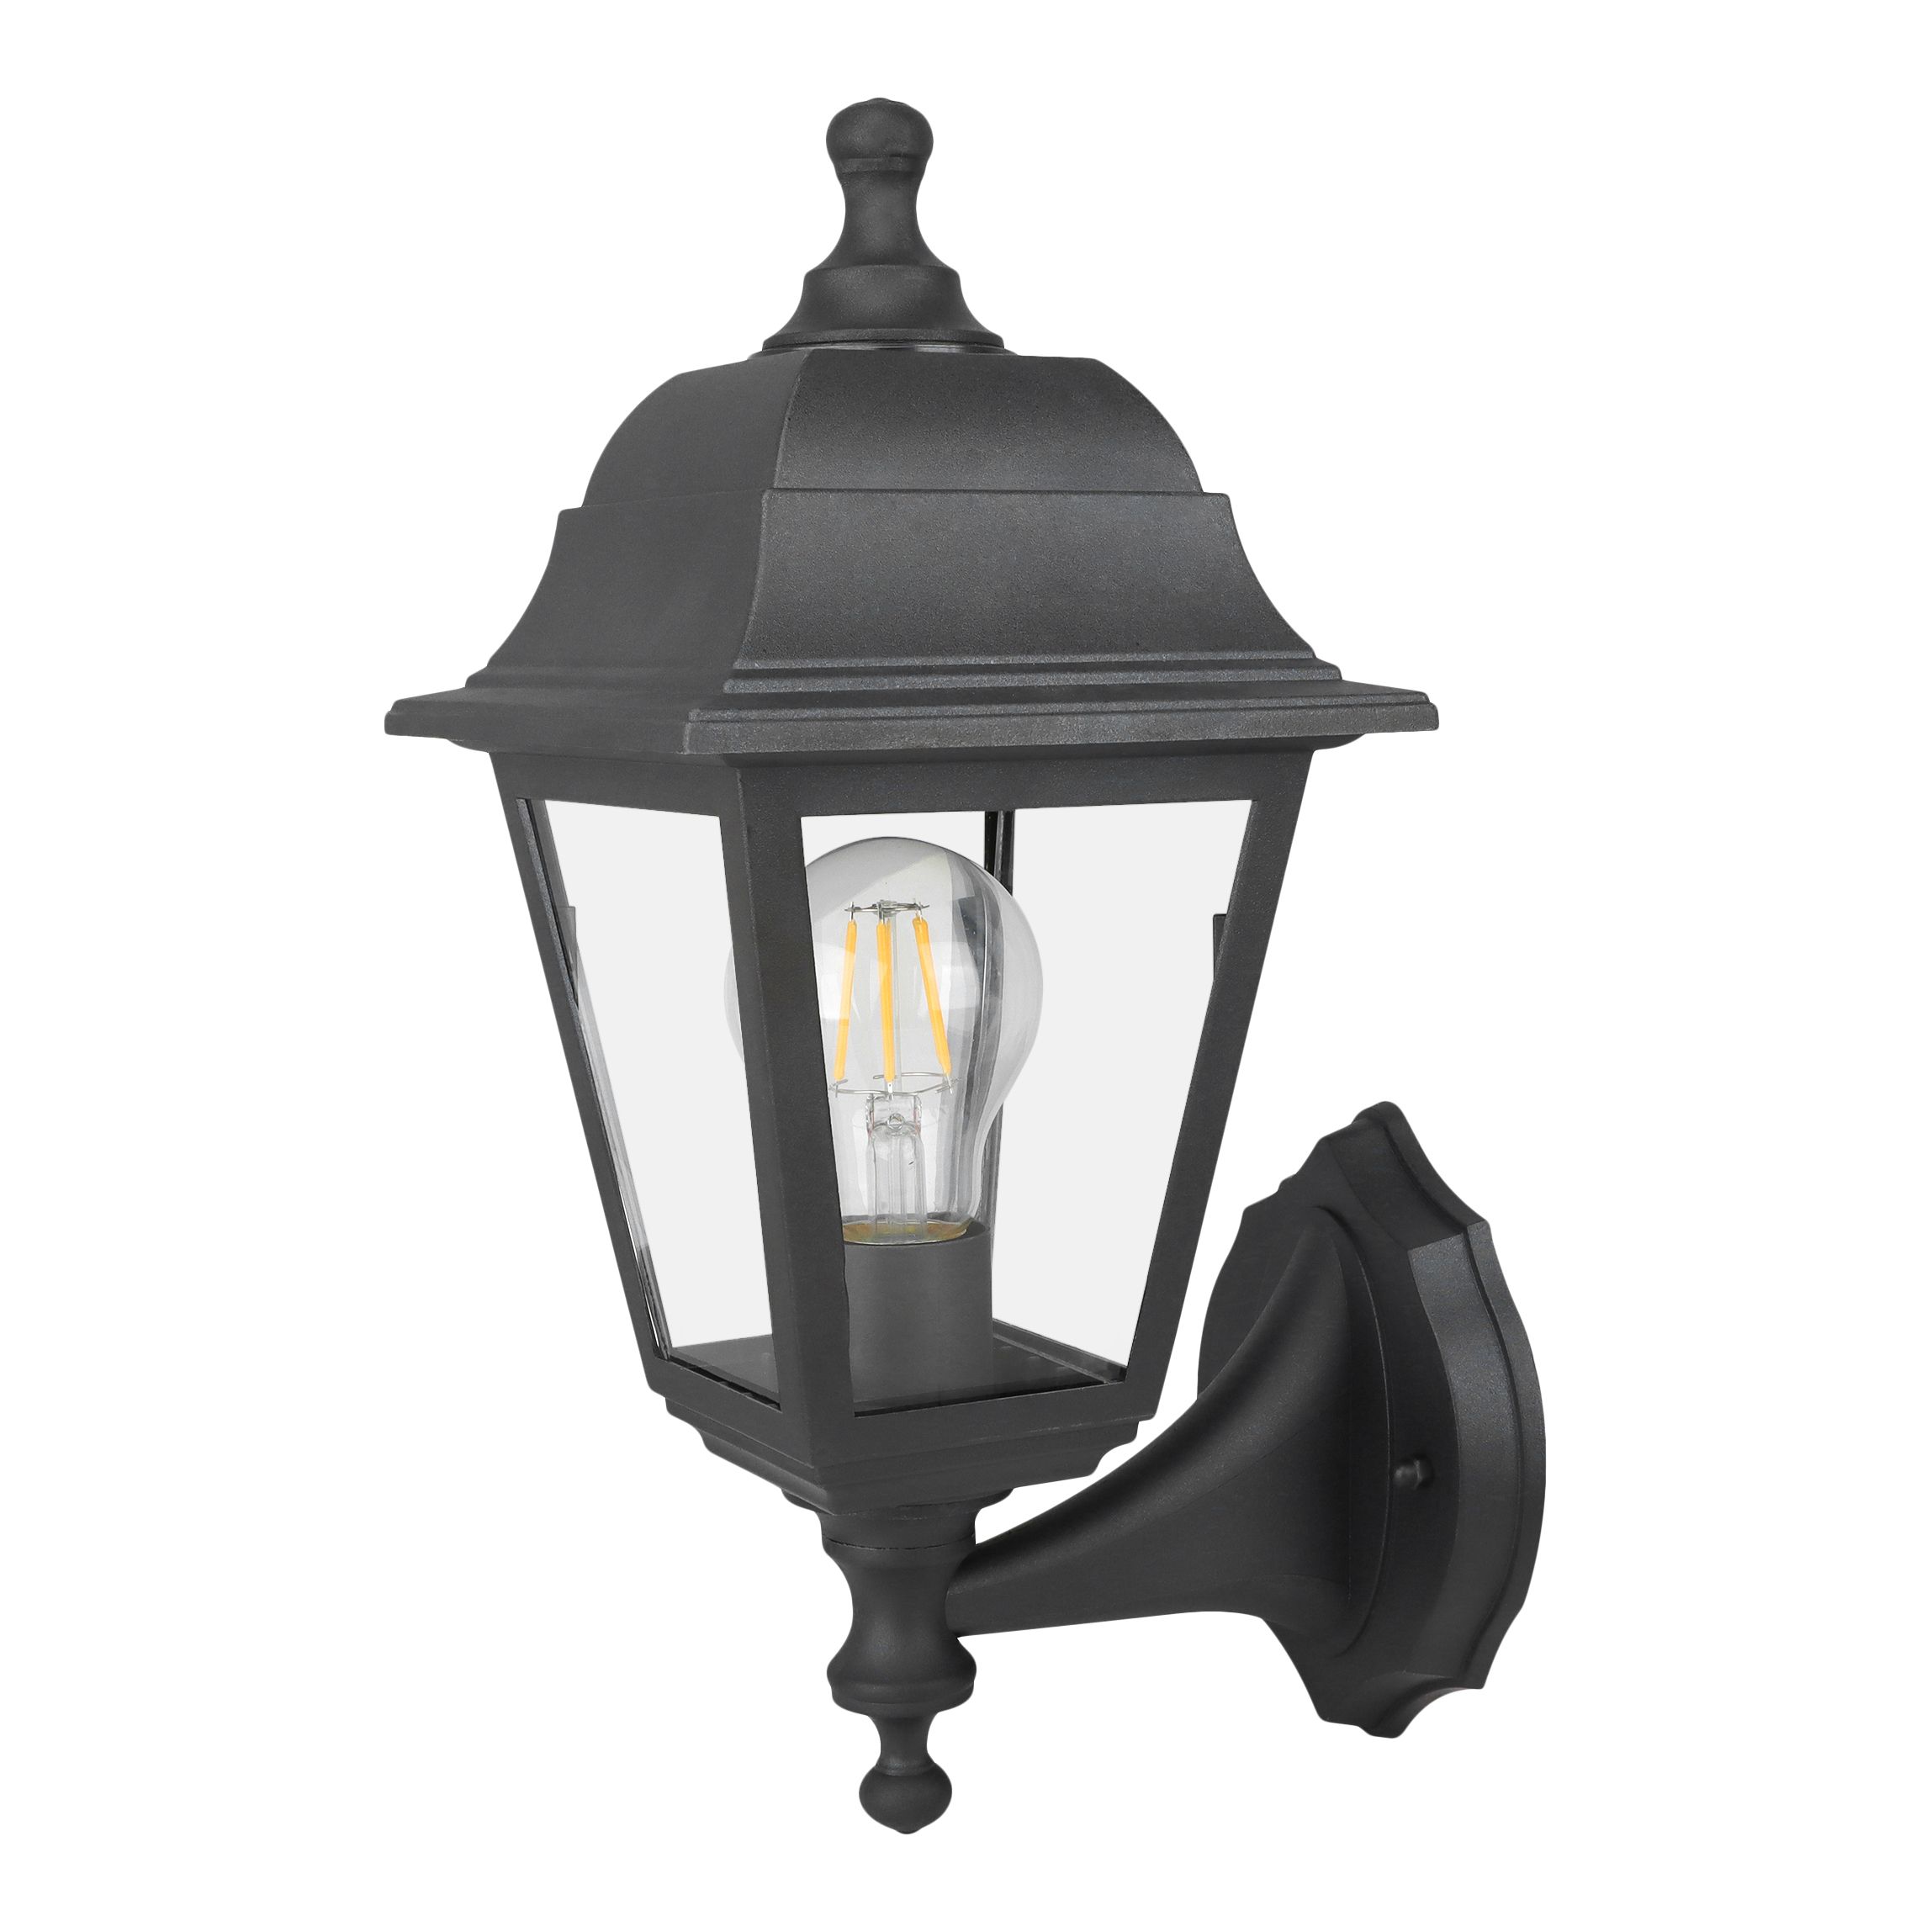 Fixed Black Mains-powered Outdoor Wall light with Up & down installation